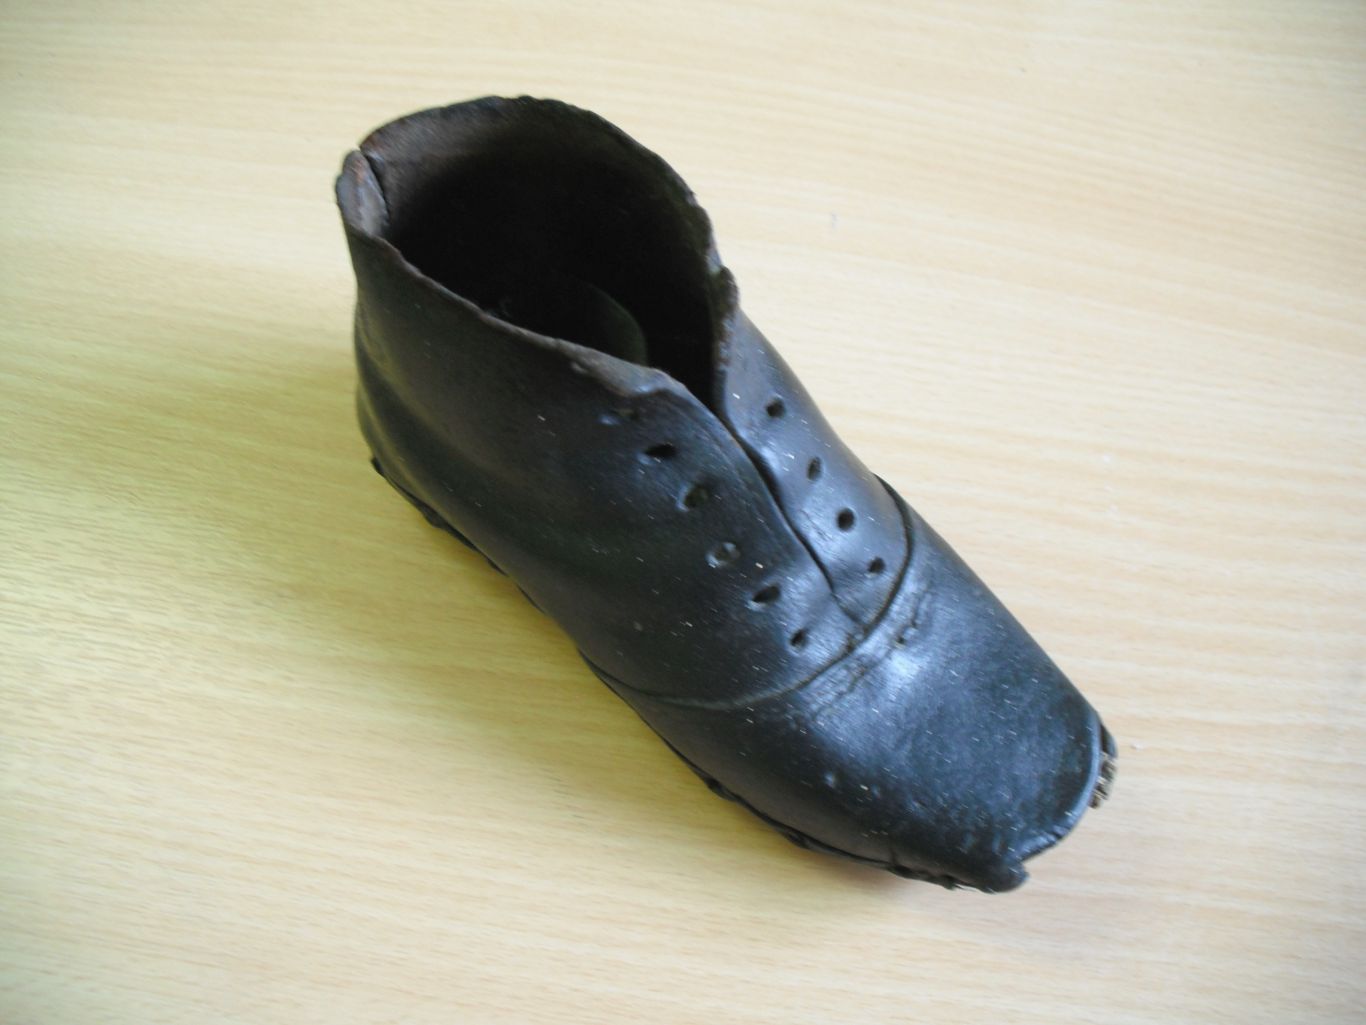 Figure 1. An 18th/19th-century child’s shoe found in the chimneybreast of a house in Ilkley, Yorkshire. Photograph by C. Houlbrook, April 2011